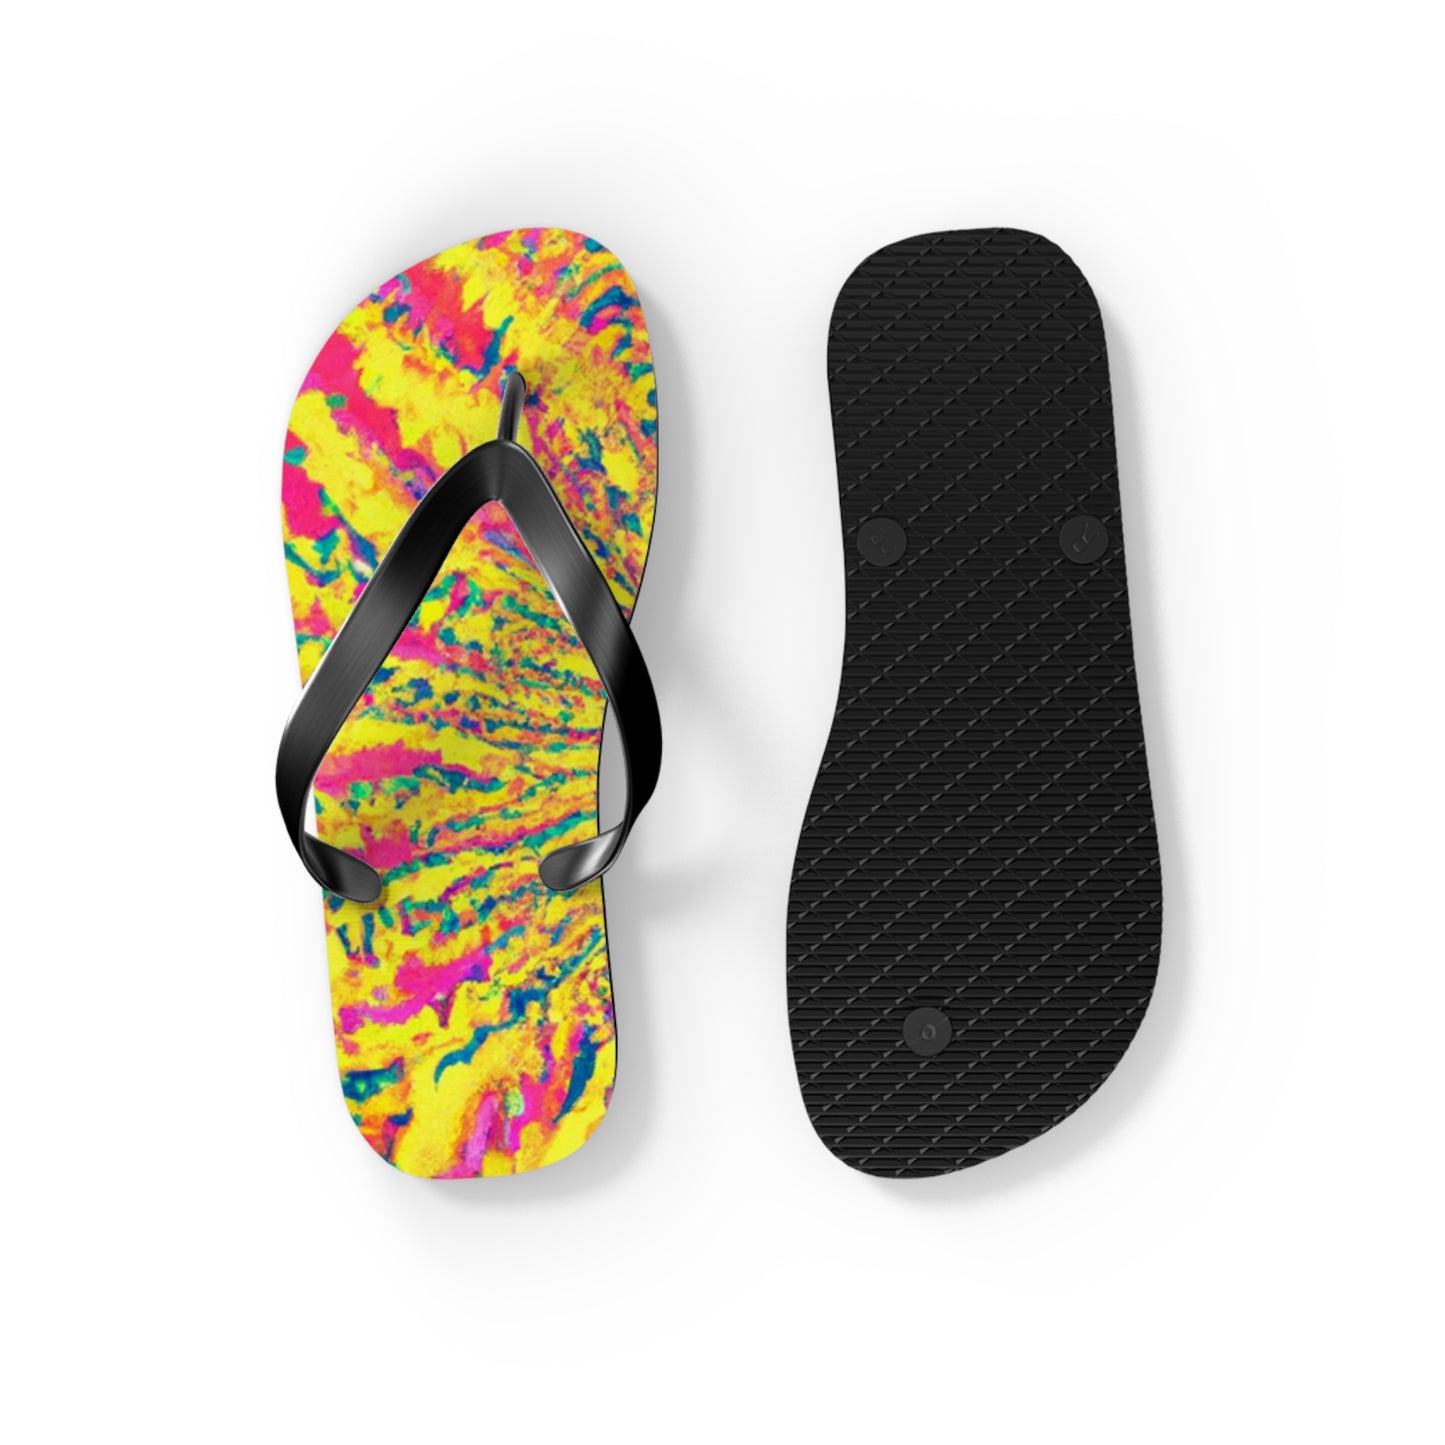 Esther Wainwright Shoe Maker - Psychedelic Trippy Flip Flop Beach Sandals